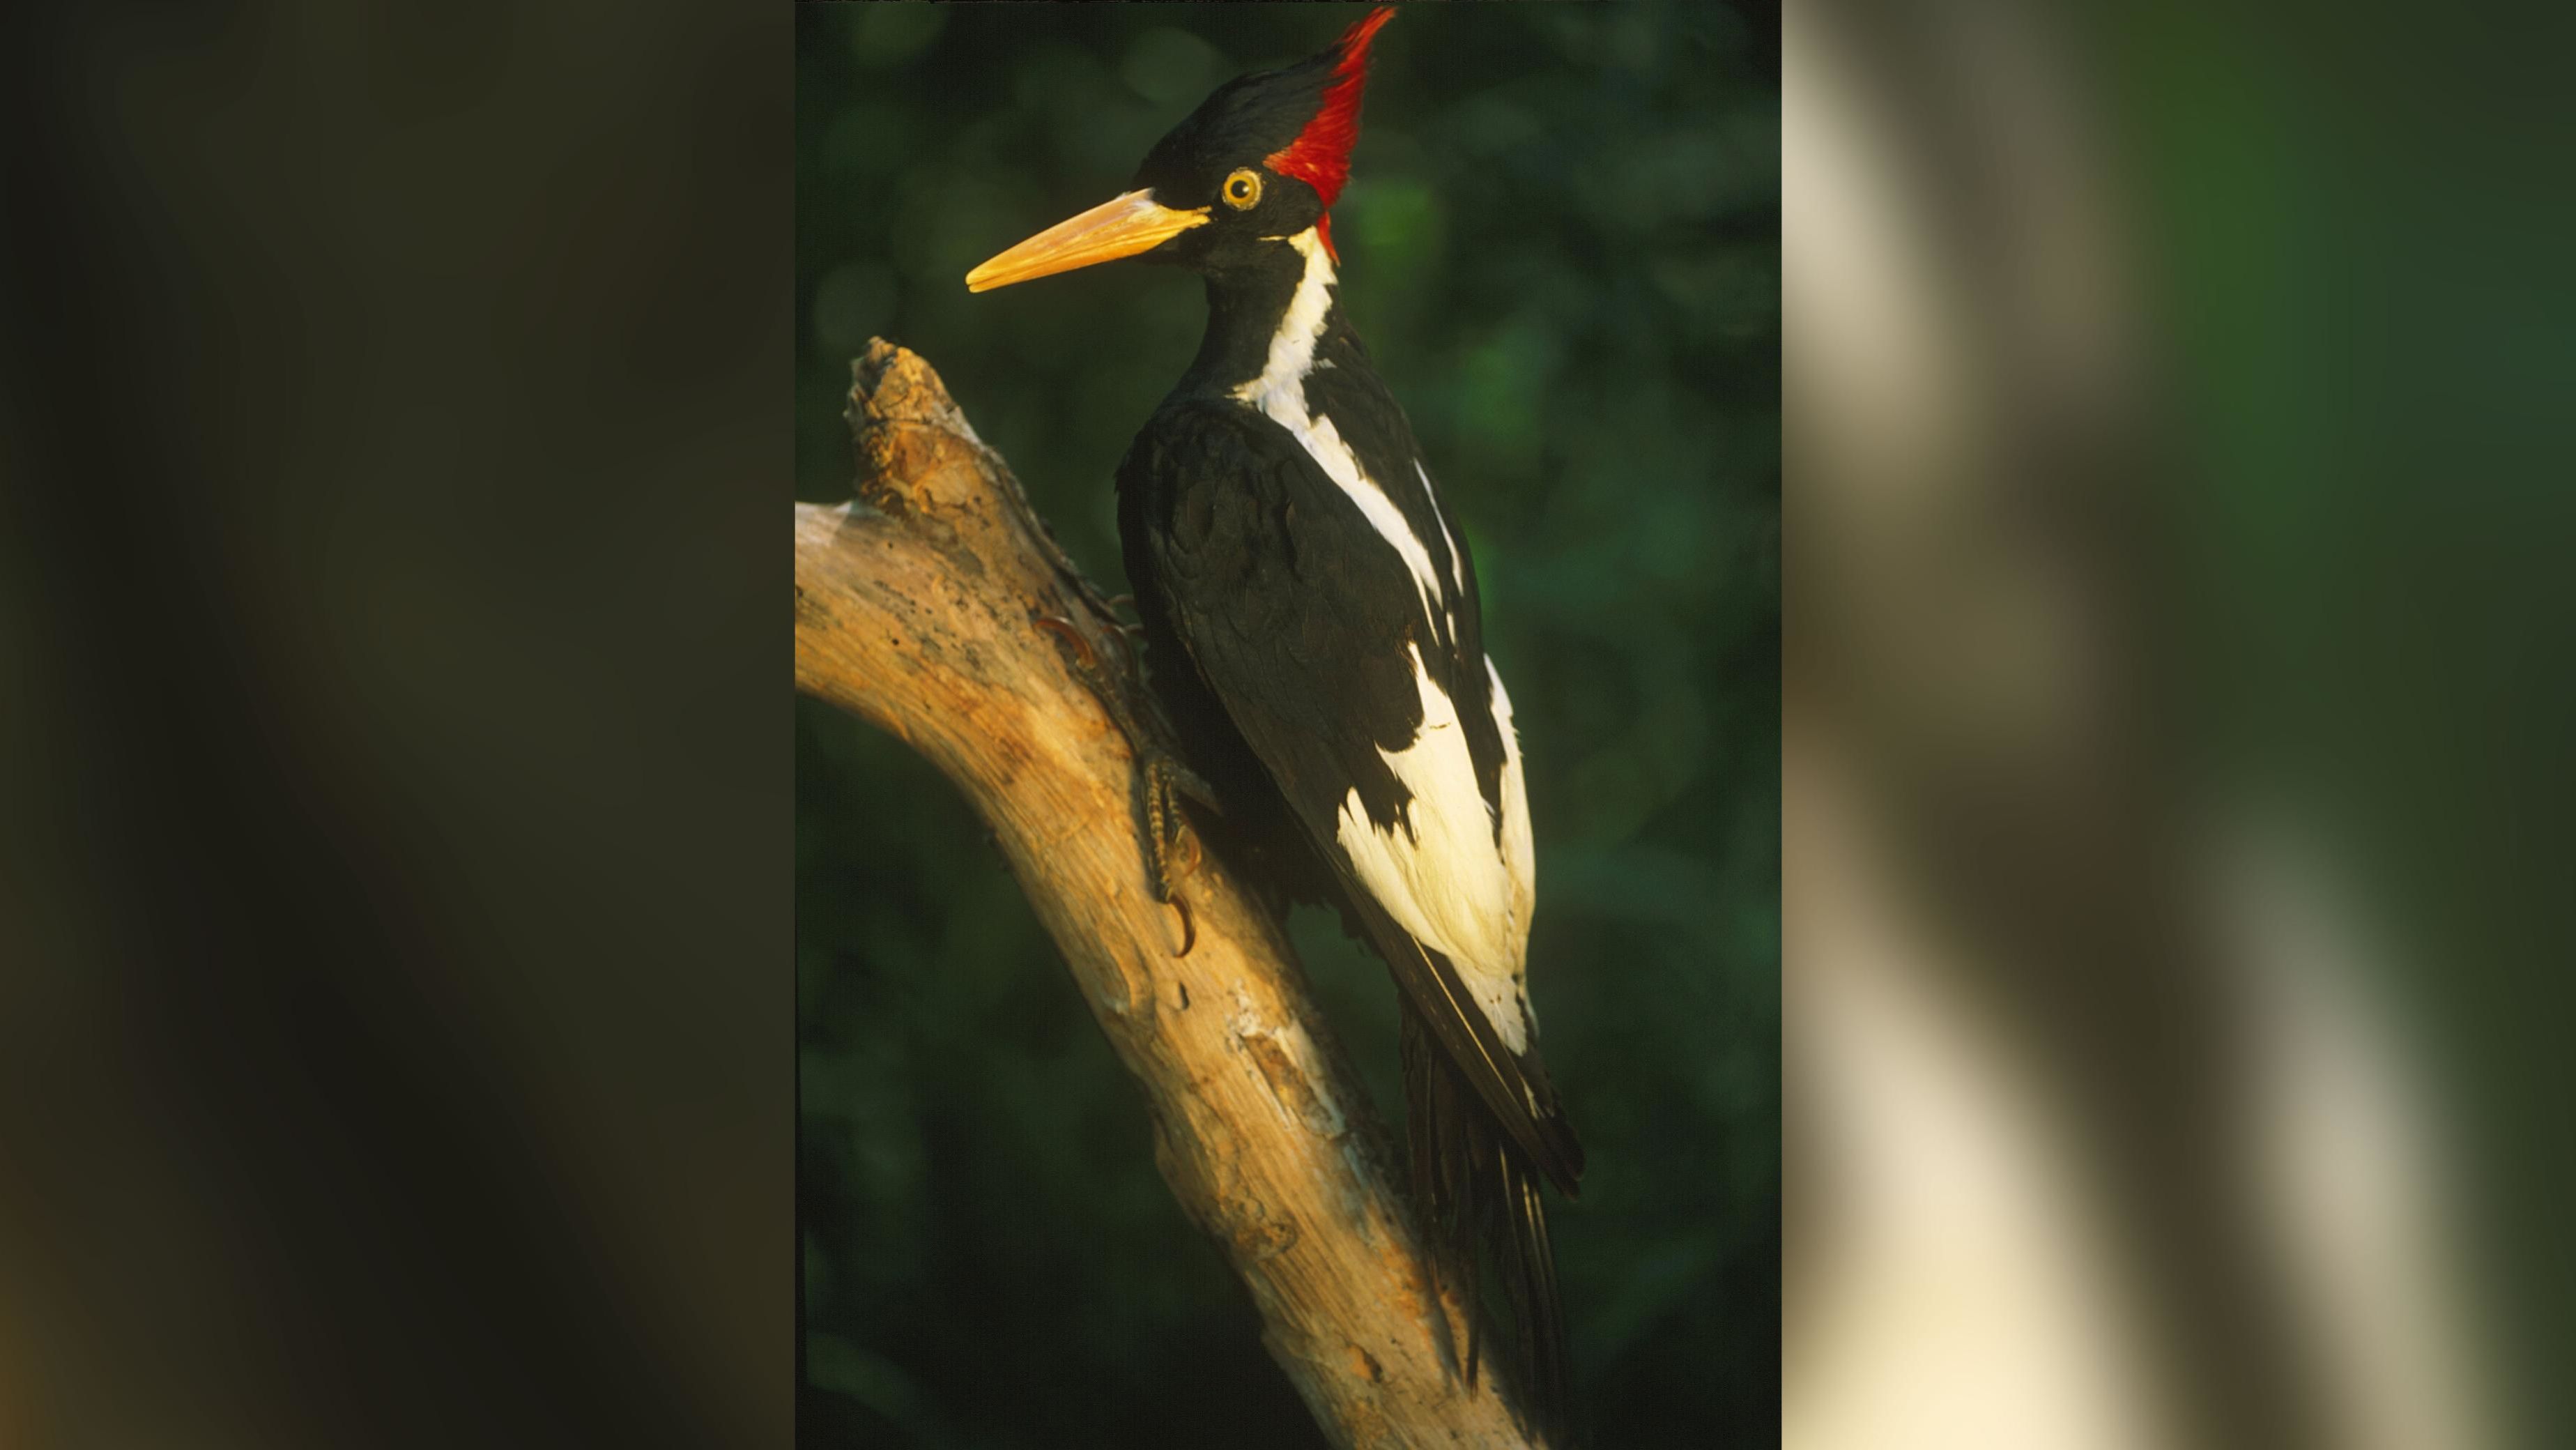 The ivory-billed woodpecker, seen here as a mounted specimen, depended on large Southern swamps.